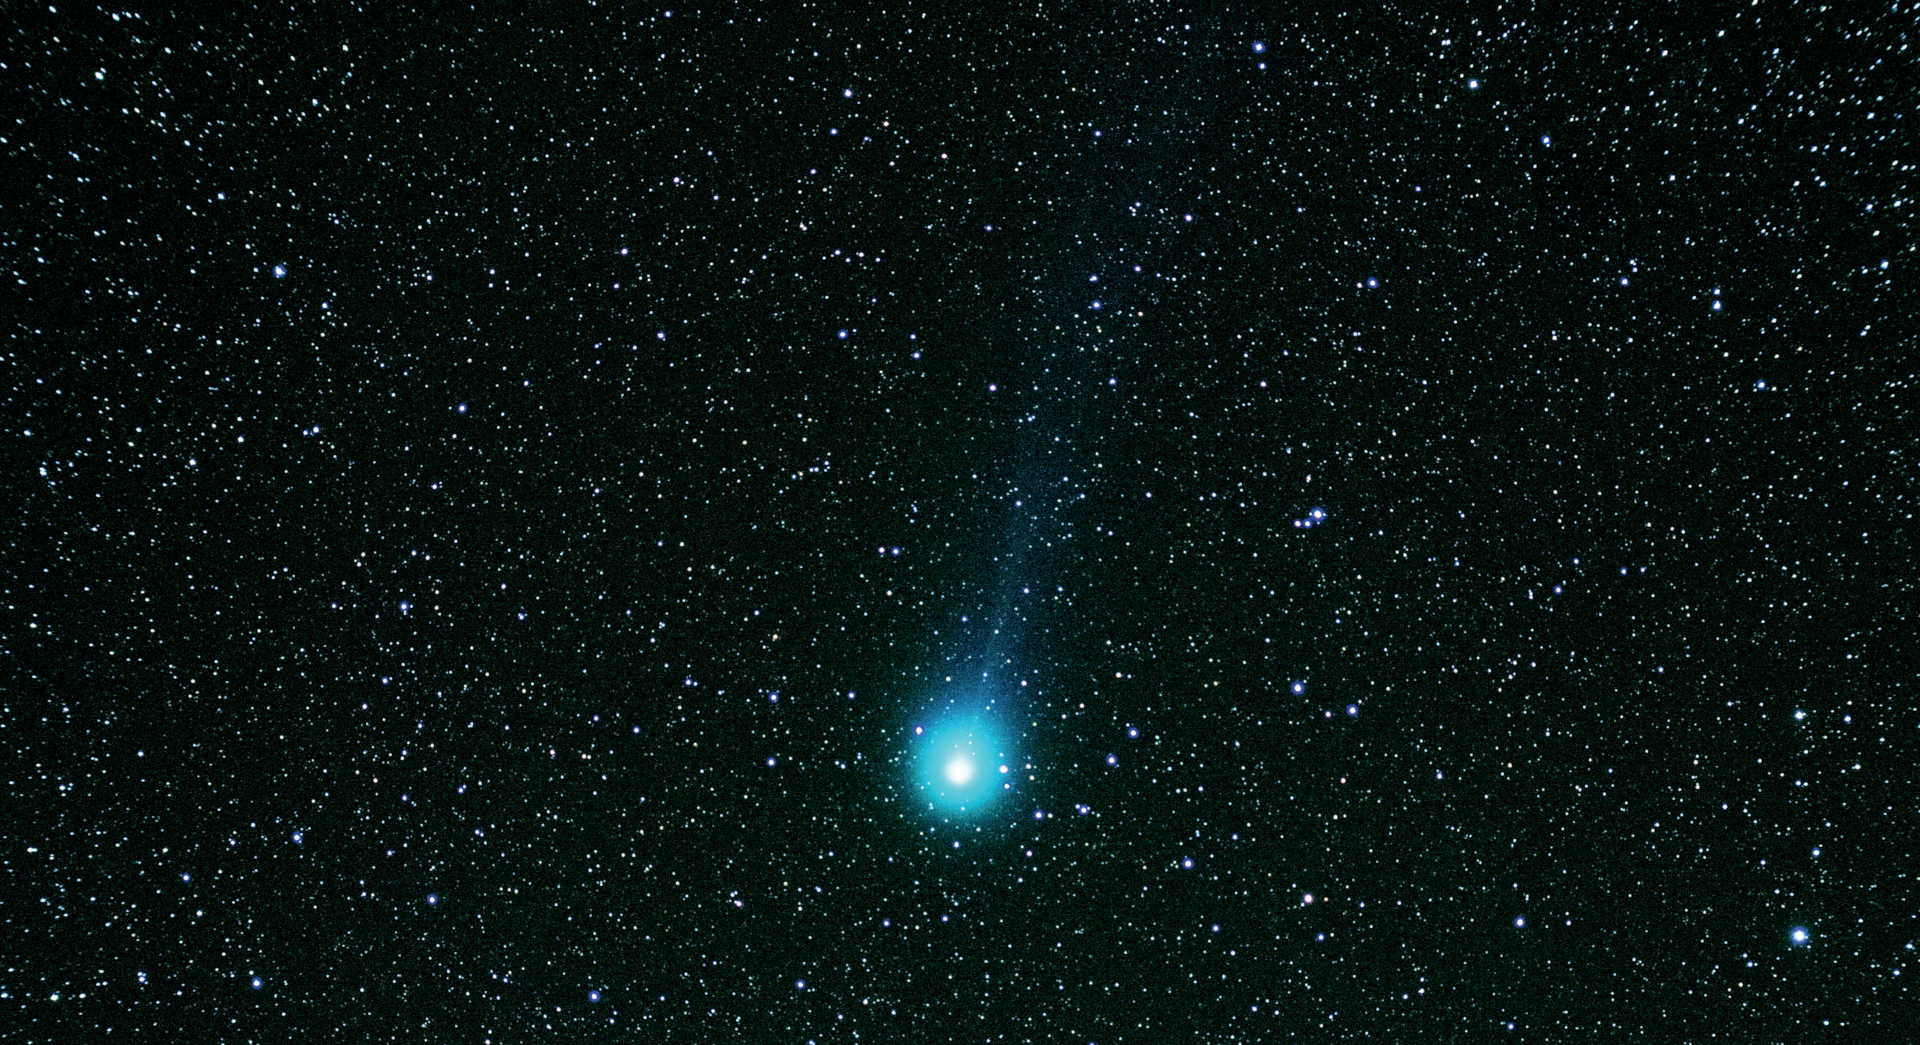 Comet C/2014 Q2 (Lovejoy) with a short focal length refractor. Composite image captured on 7.3.2015 using a Canon D550 DSLR on a 355mm apo refractor with a 60mm aperture. Five shots each with an exposure time of 120 seconds (total exposure time: 10 minutes) were combined with DeepSkyStacker and Photoshop for the total image. U. Dittler